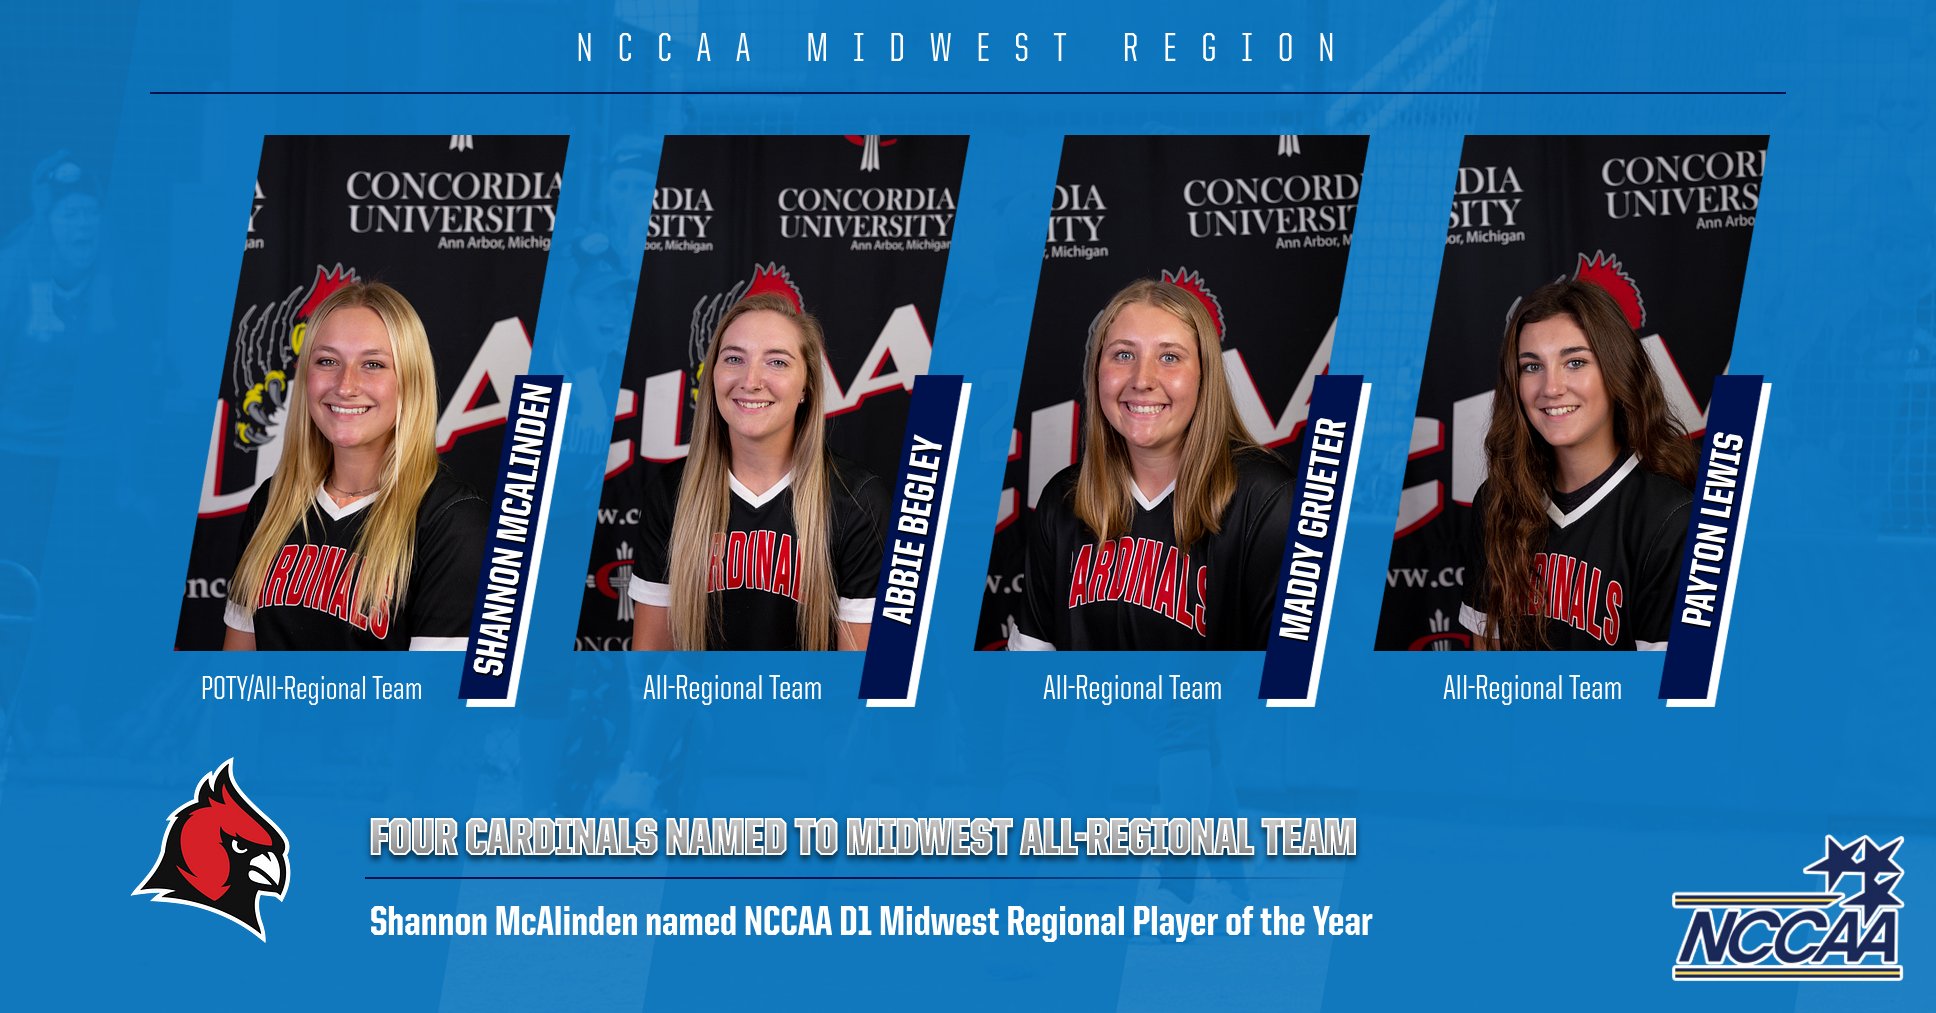 Softball has 4 Cardinals make NCCAA All-Regional Team; McAlinden named Midwest Player of the Year